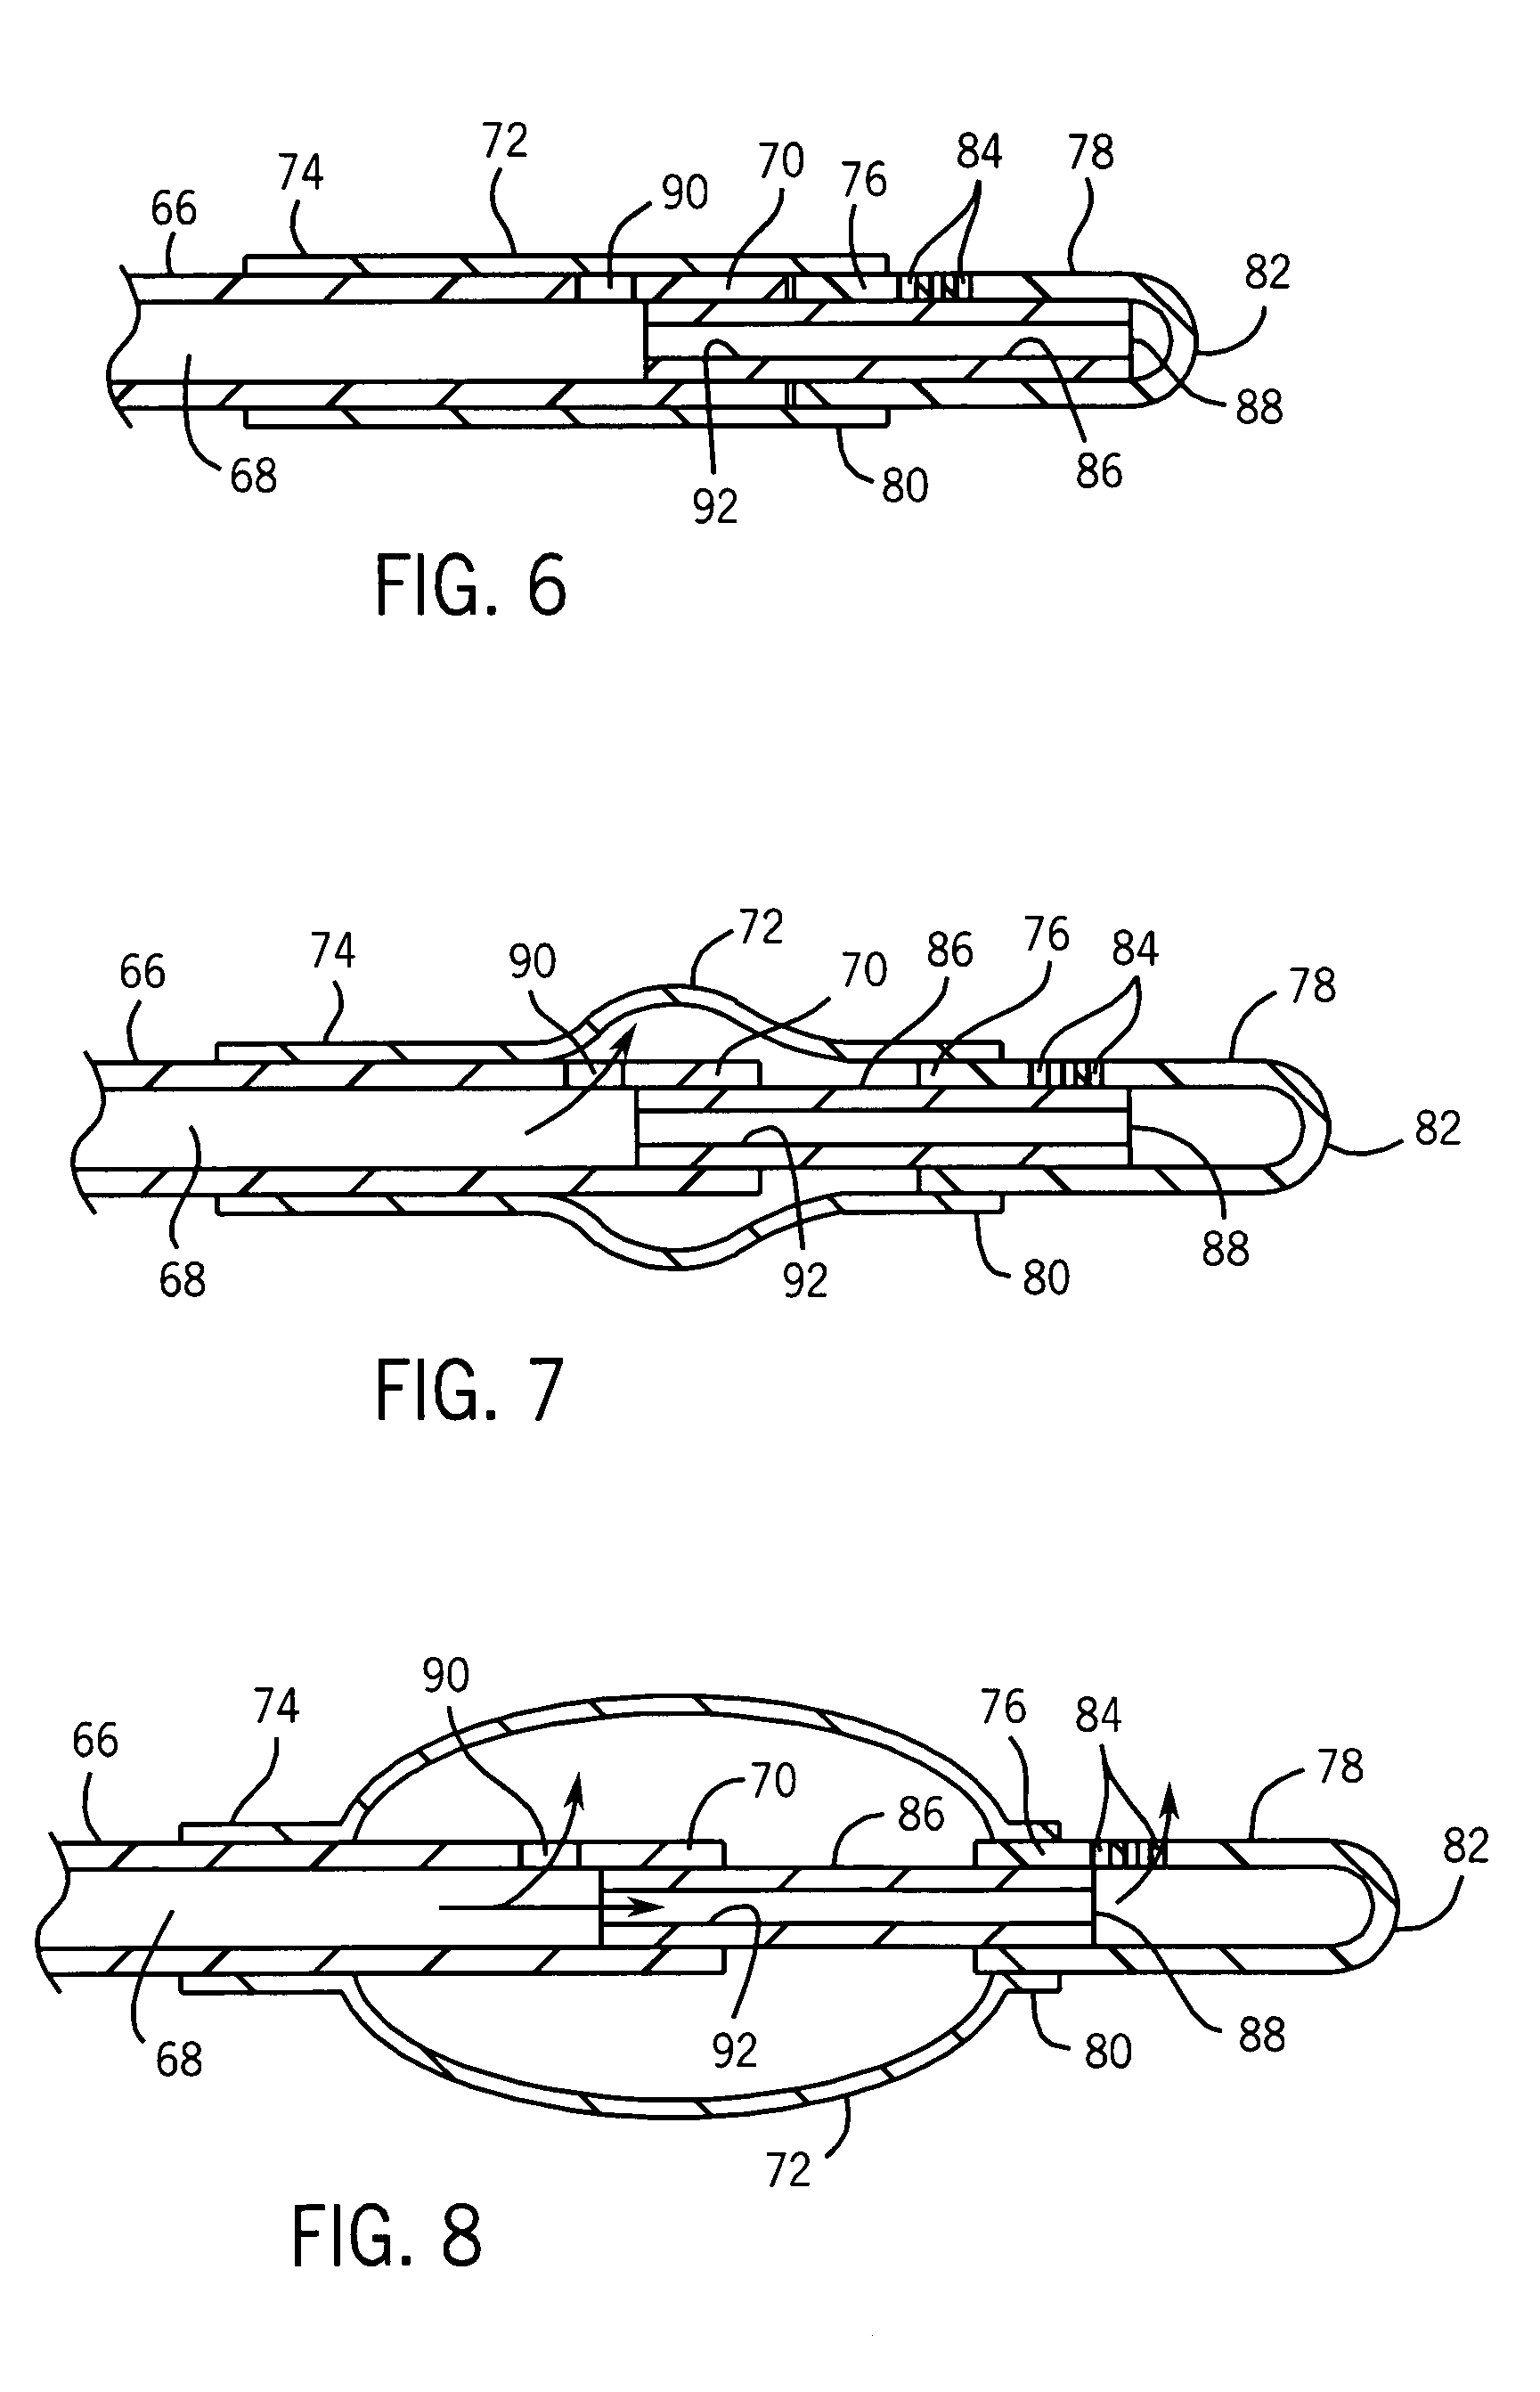 Catheter with autoinflating, autoregulating balloon